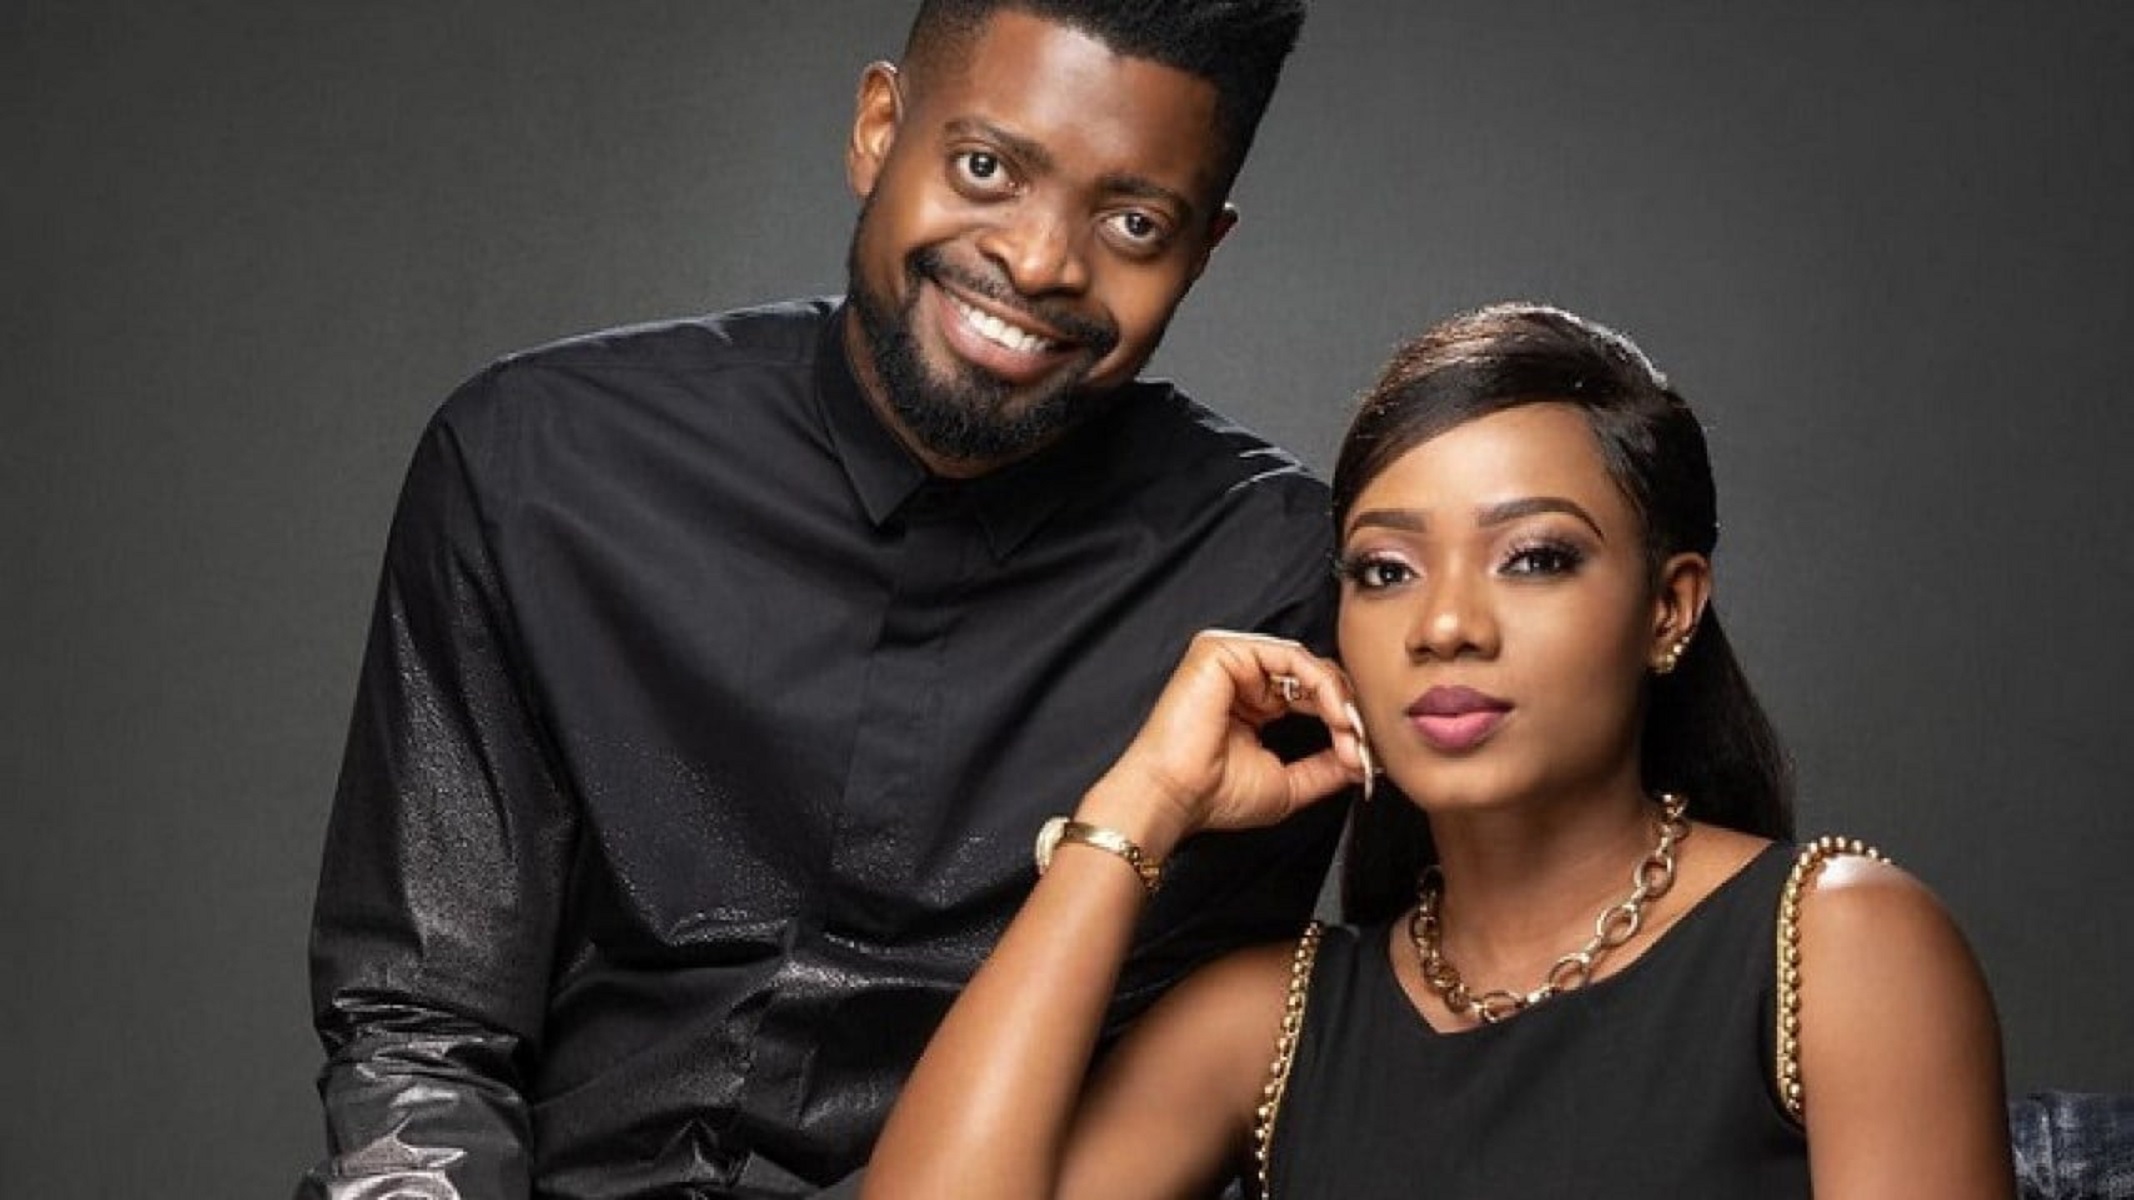 Basketmouth S Wife Shared These S3xy Photos To Celebrate Her Birthday Mpmania